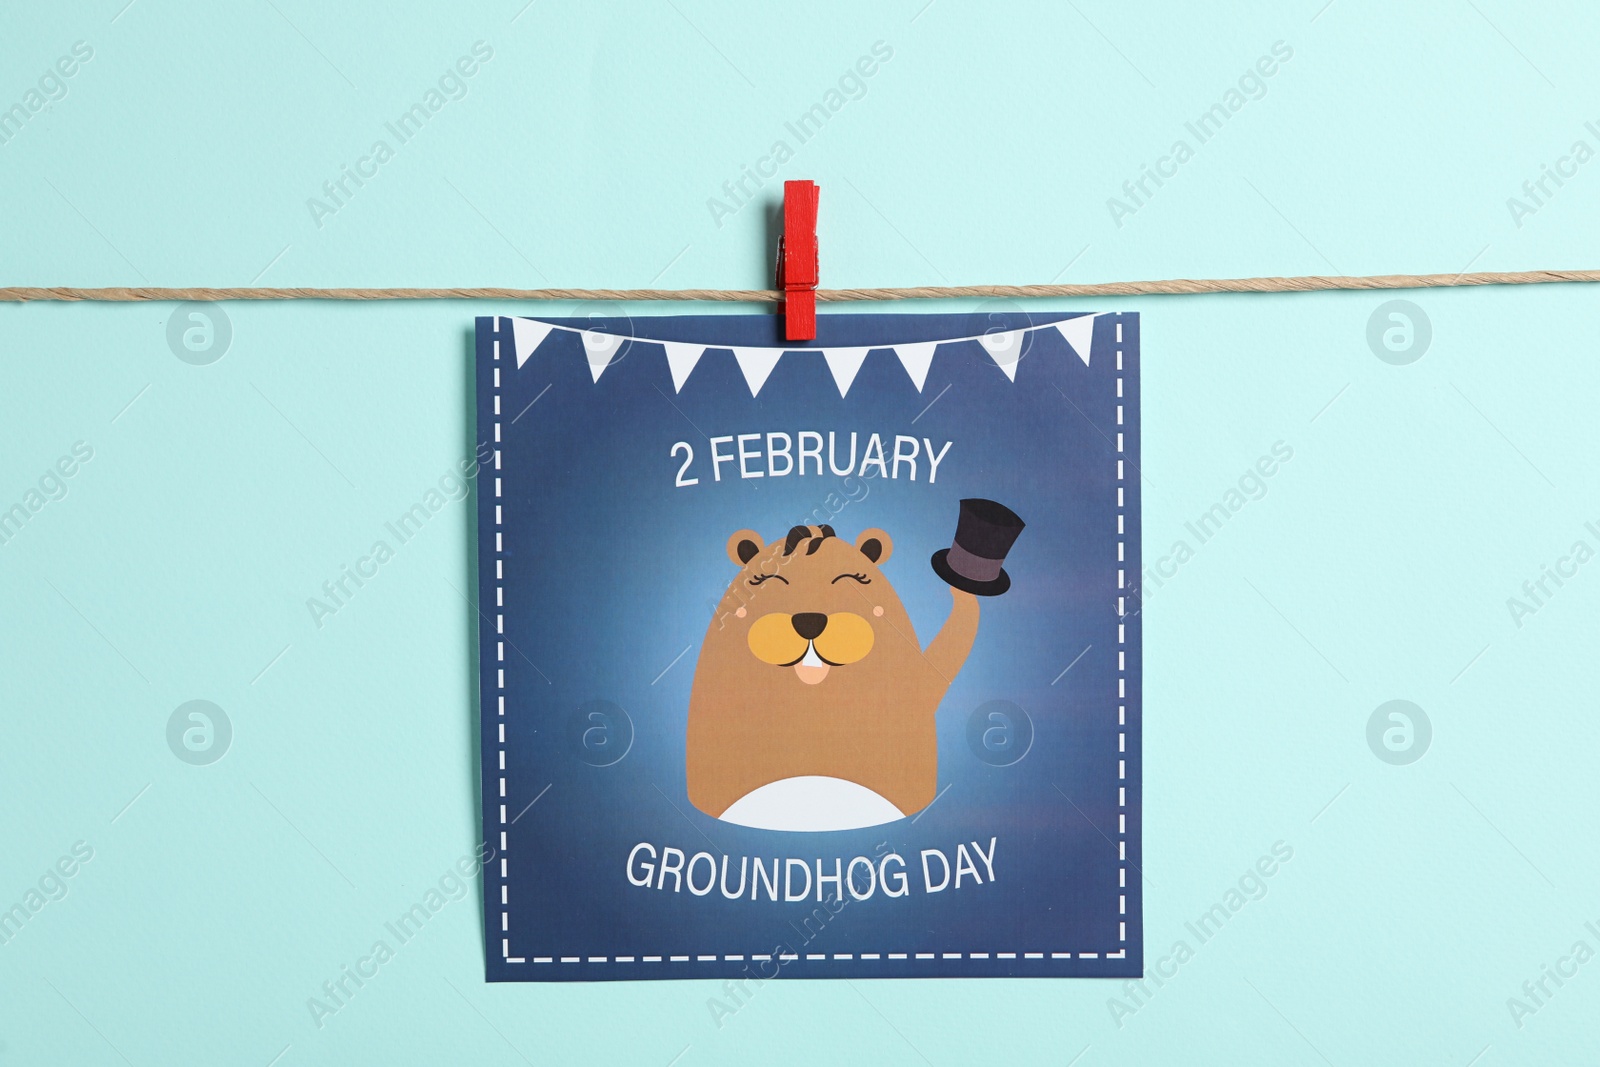 Photo of Happy Groundhog Day greeting card hanging on turquoise background